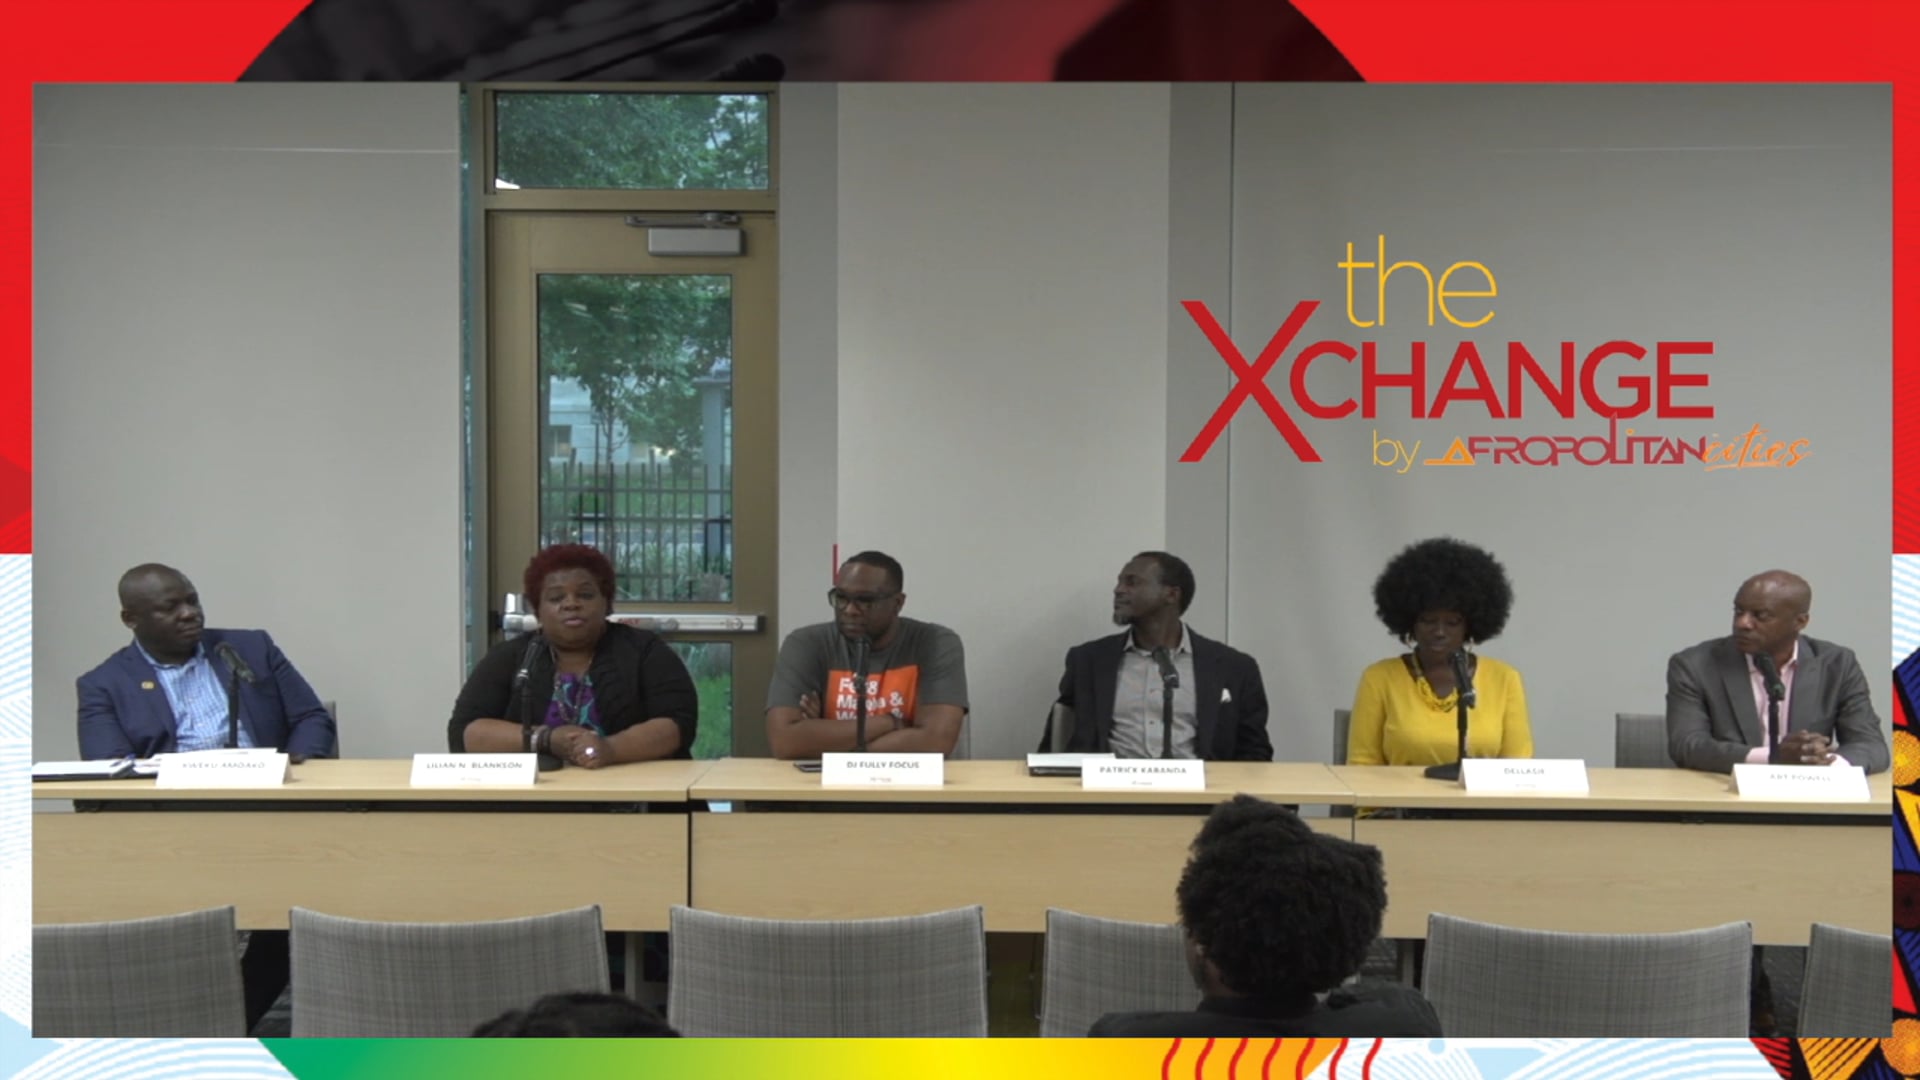 The Xchange - Lilian Blankson of LNB Entertainment says Afrobeats is just beginning to cross over. Has a long way to go